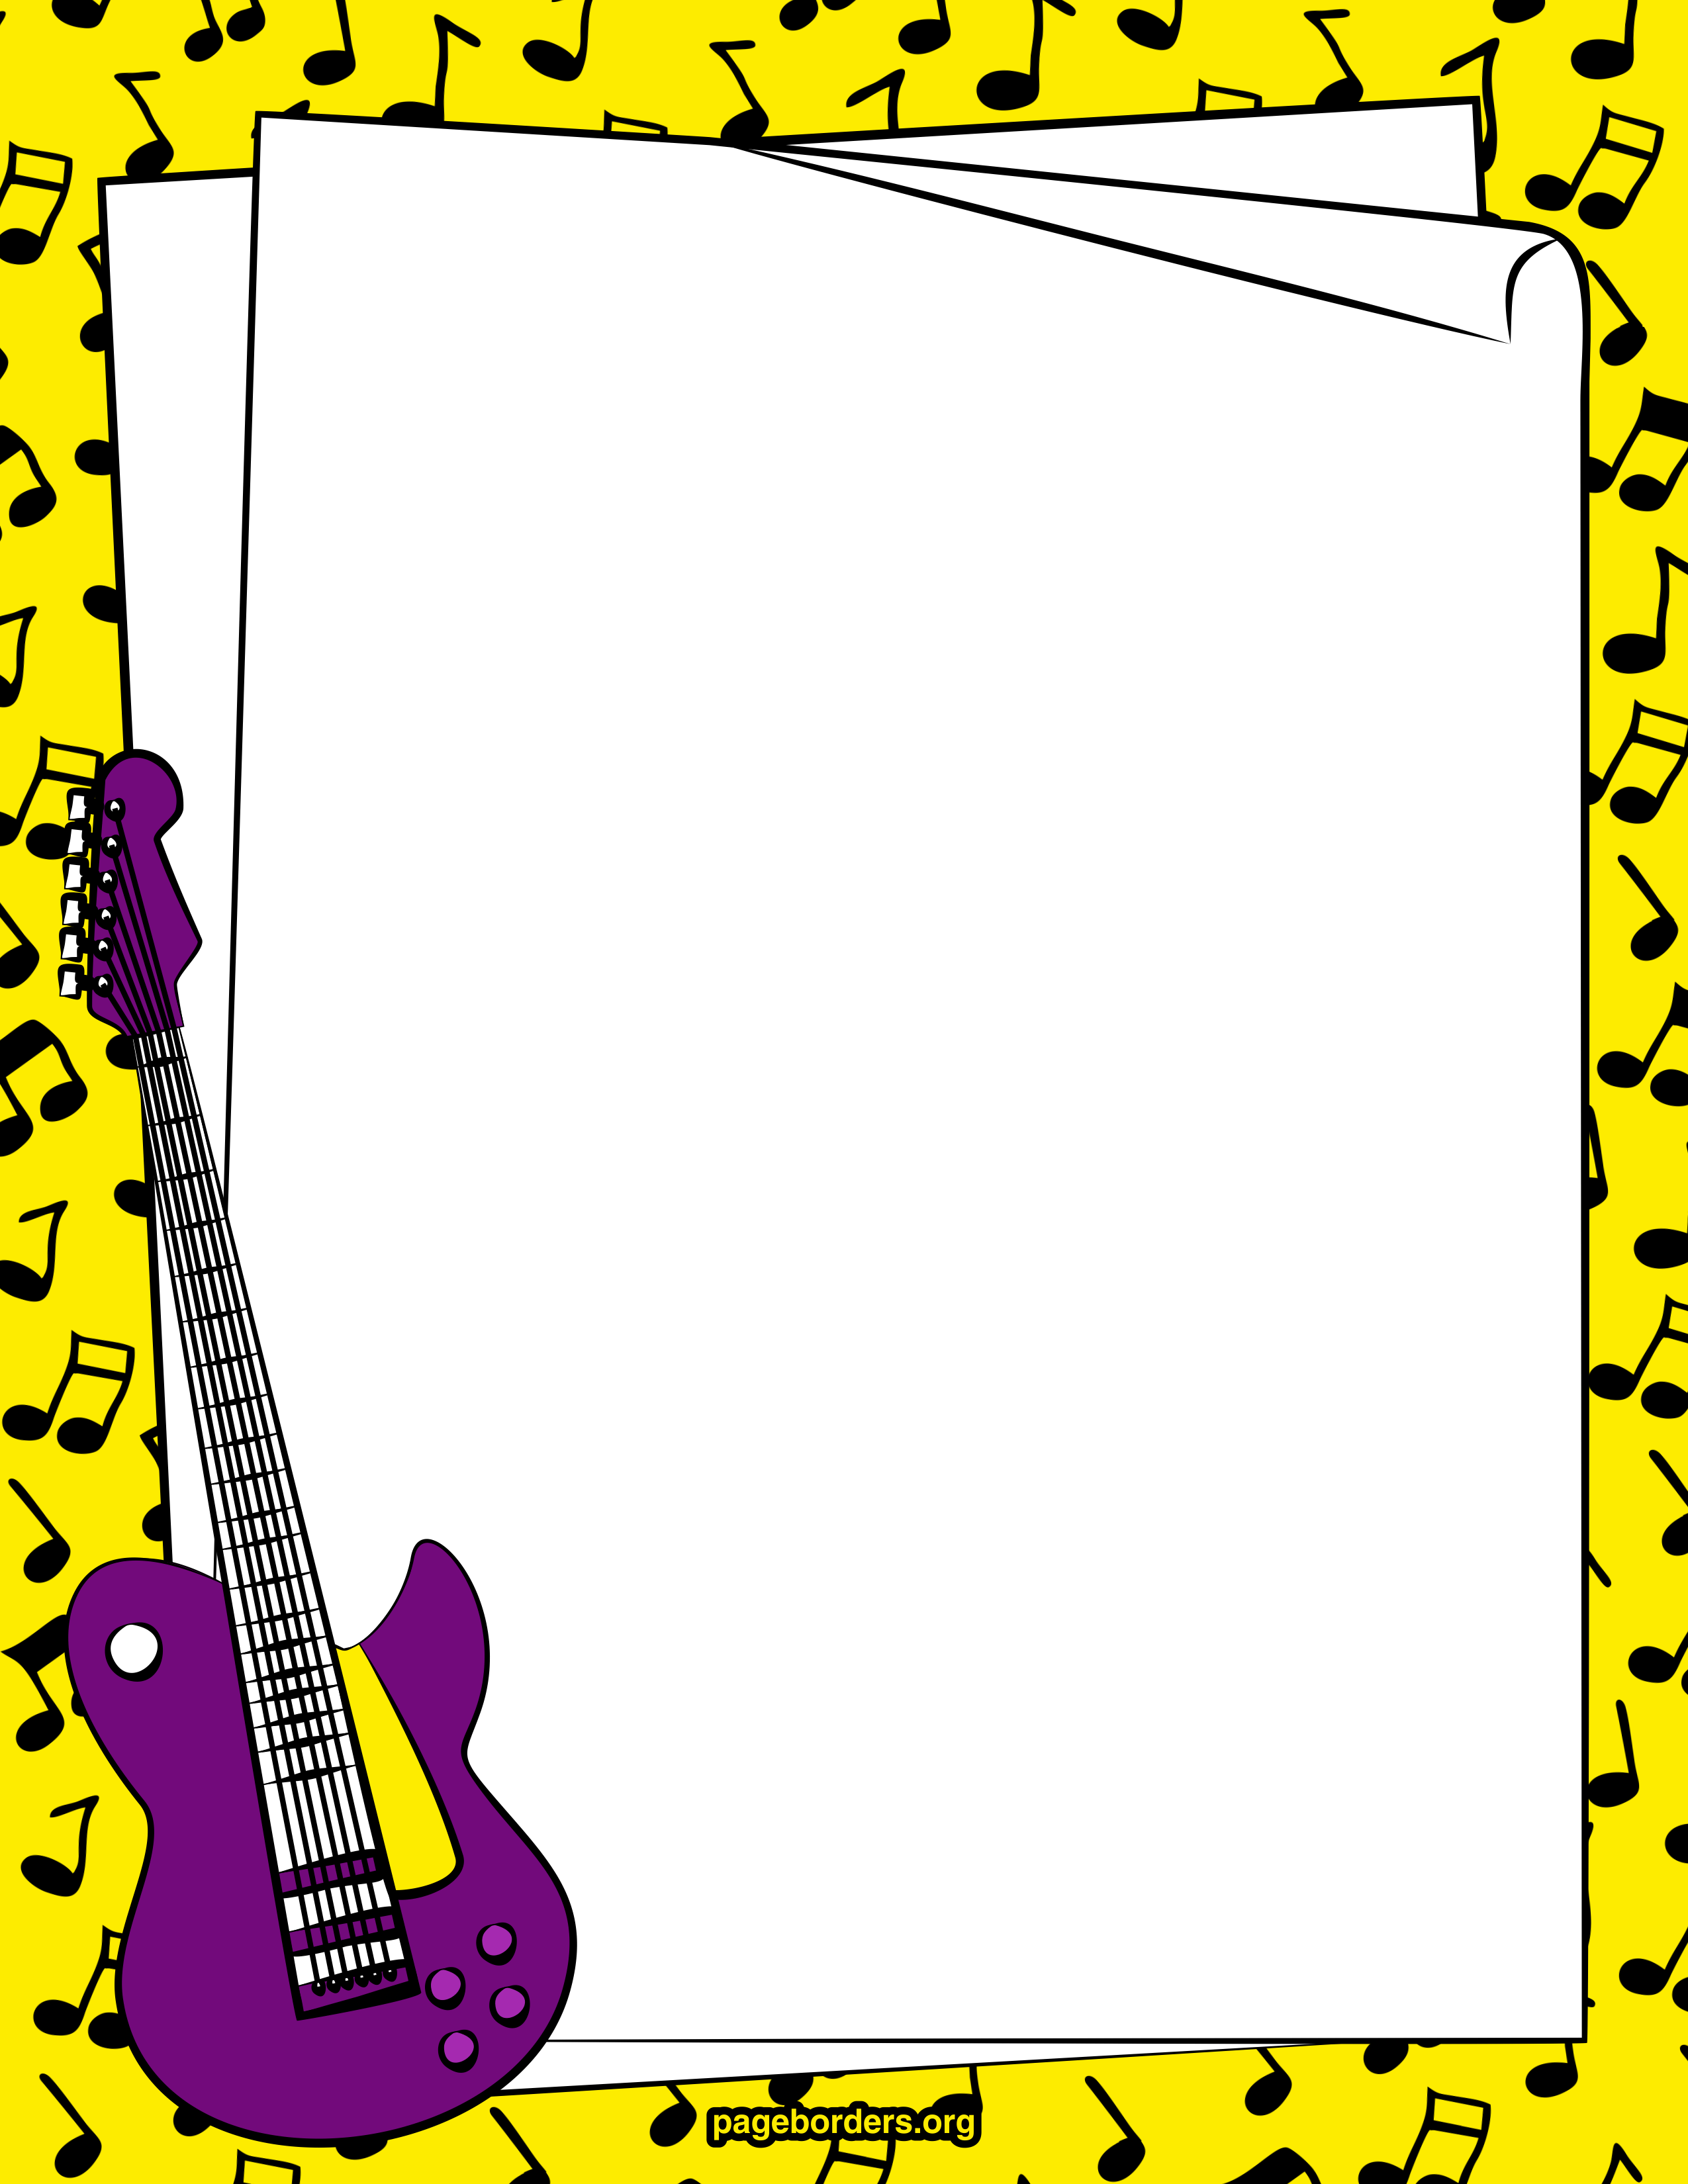 Free music borders and. Clipart guitar border